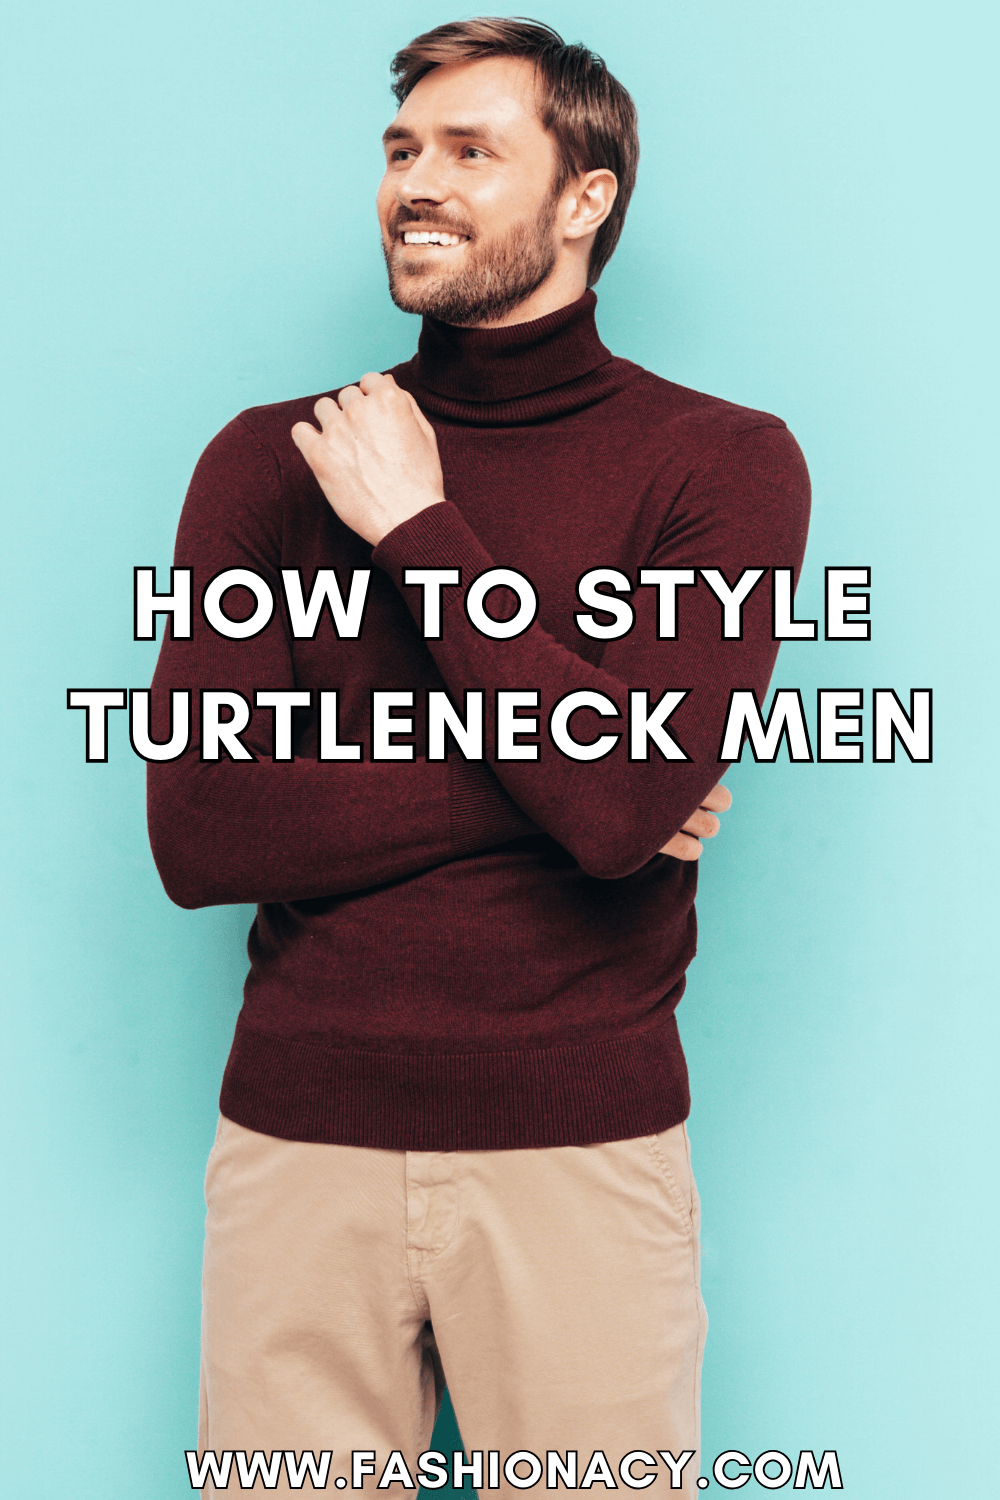 How to Wear & Style a Turtleneck (Men)